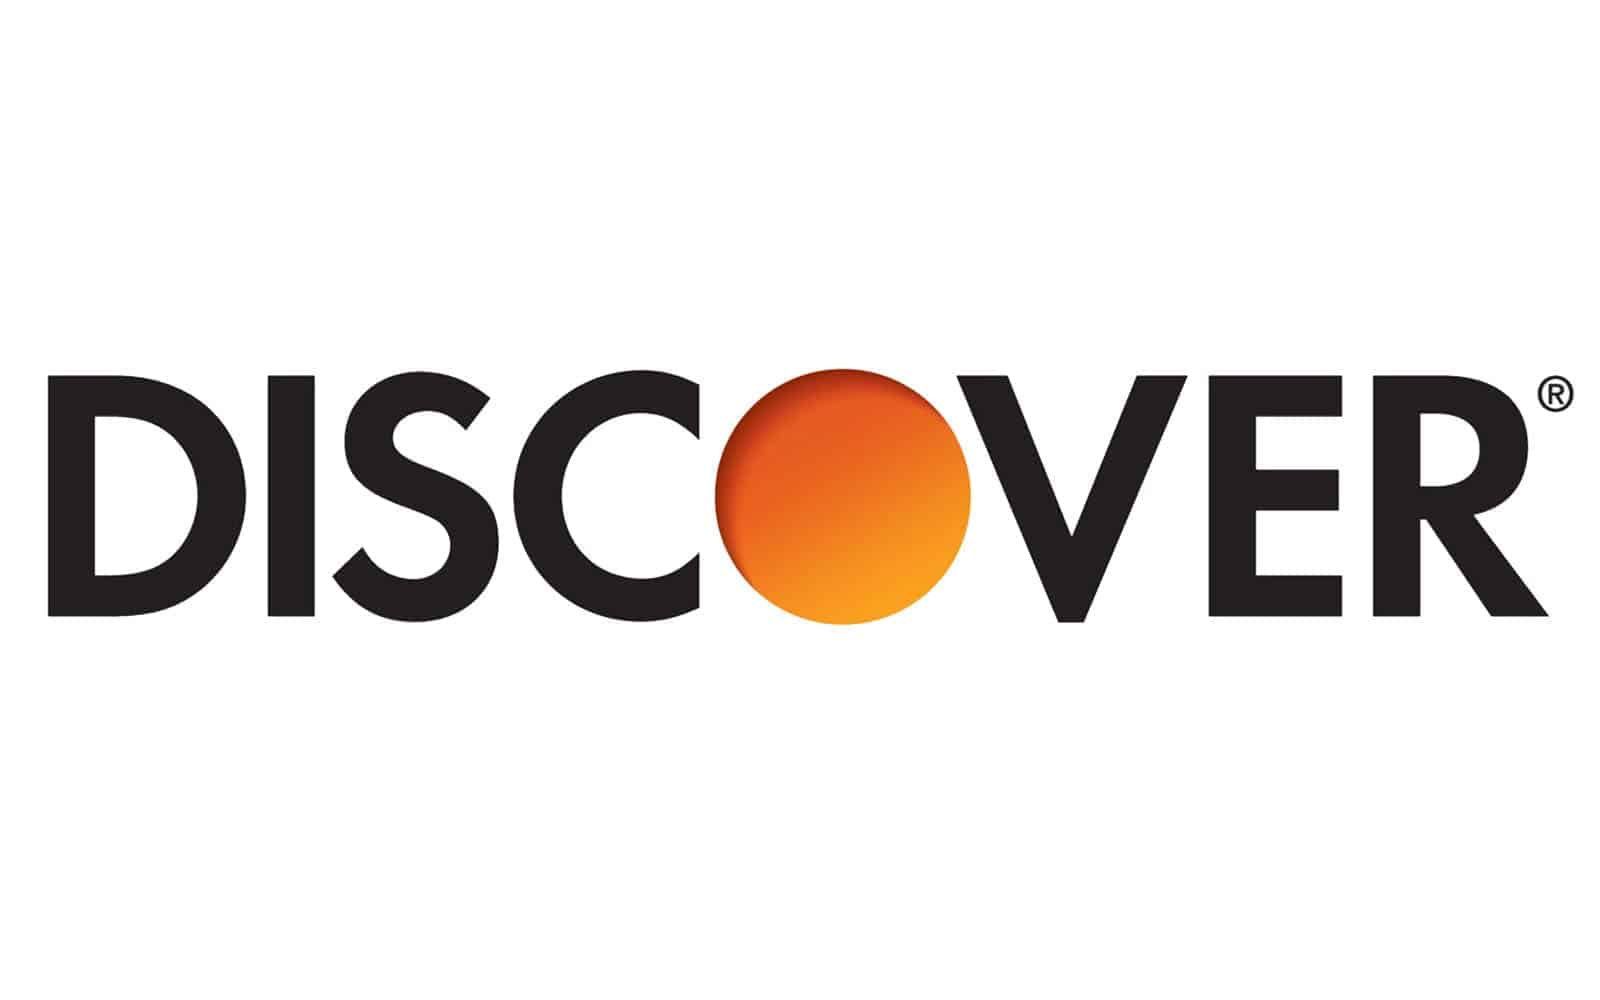 Discover Credit Cards company logo